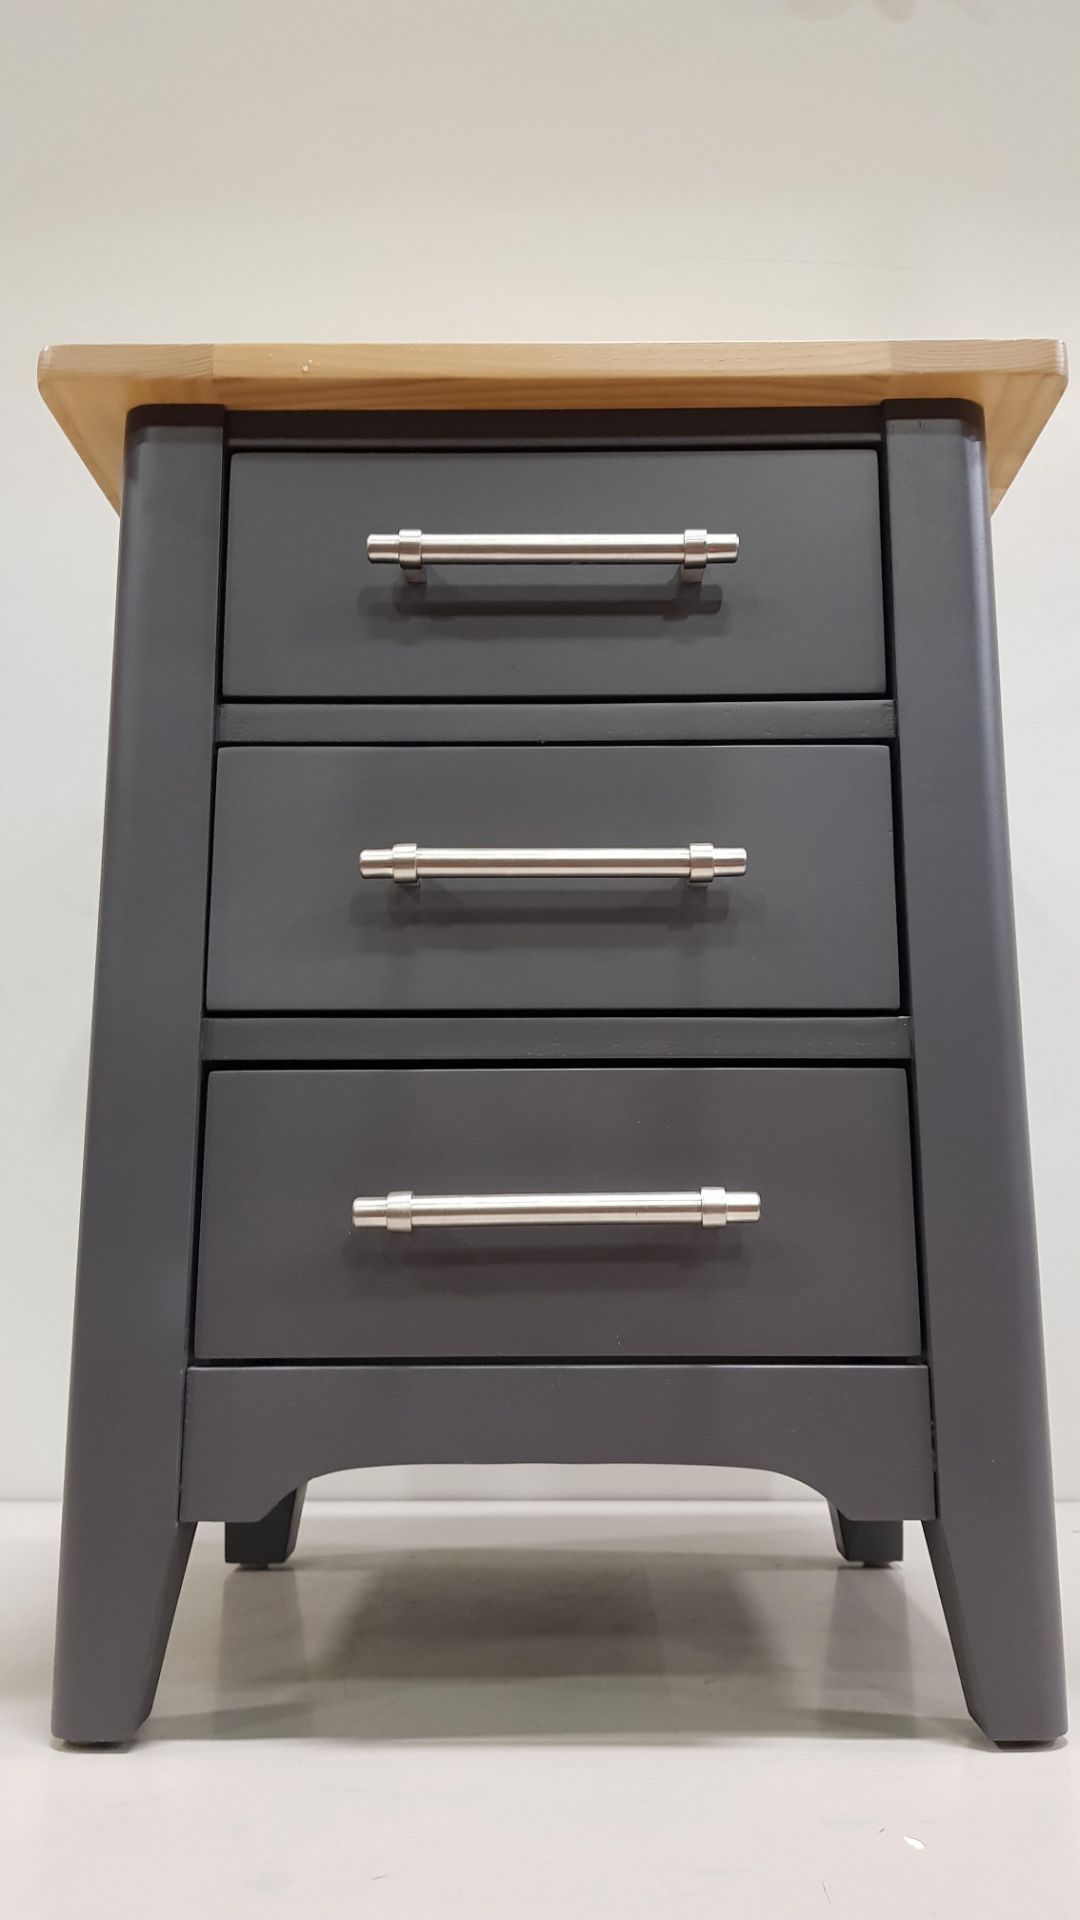 1 X BRAND NEW SOLID OAK NORMANDY BED SIDE CABINET WITH 3 DRAWERS IN DARK GREY - ACTUAL ITEM - Image 3 of 6